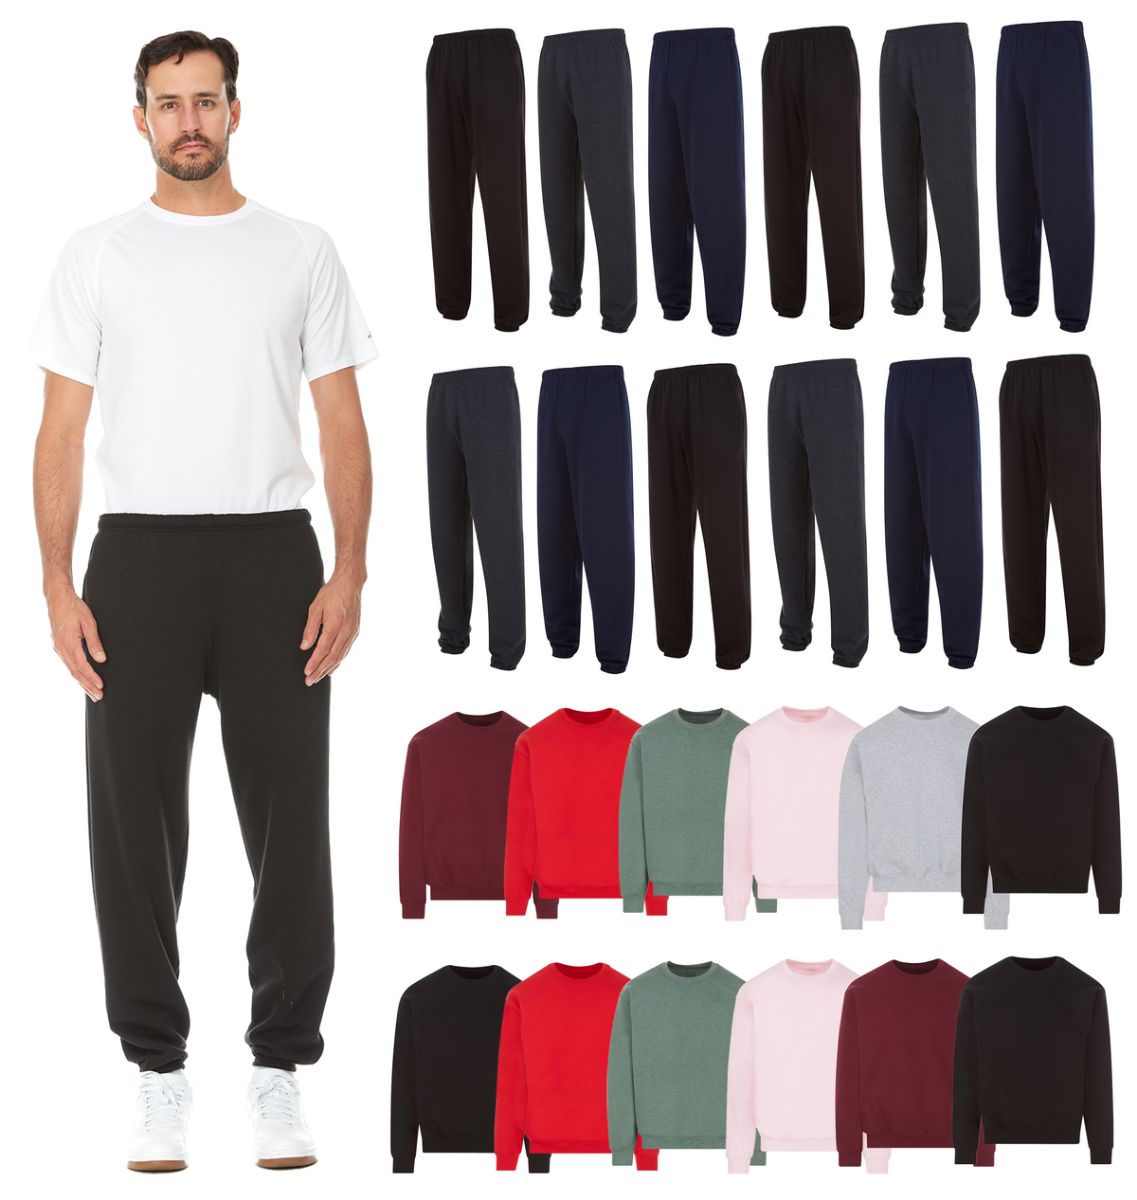 24 Pieces of Mix And Match Mens Fleece Jogger Pants And Crew Neck Sweatshirts Assorted Colors Size Medium